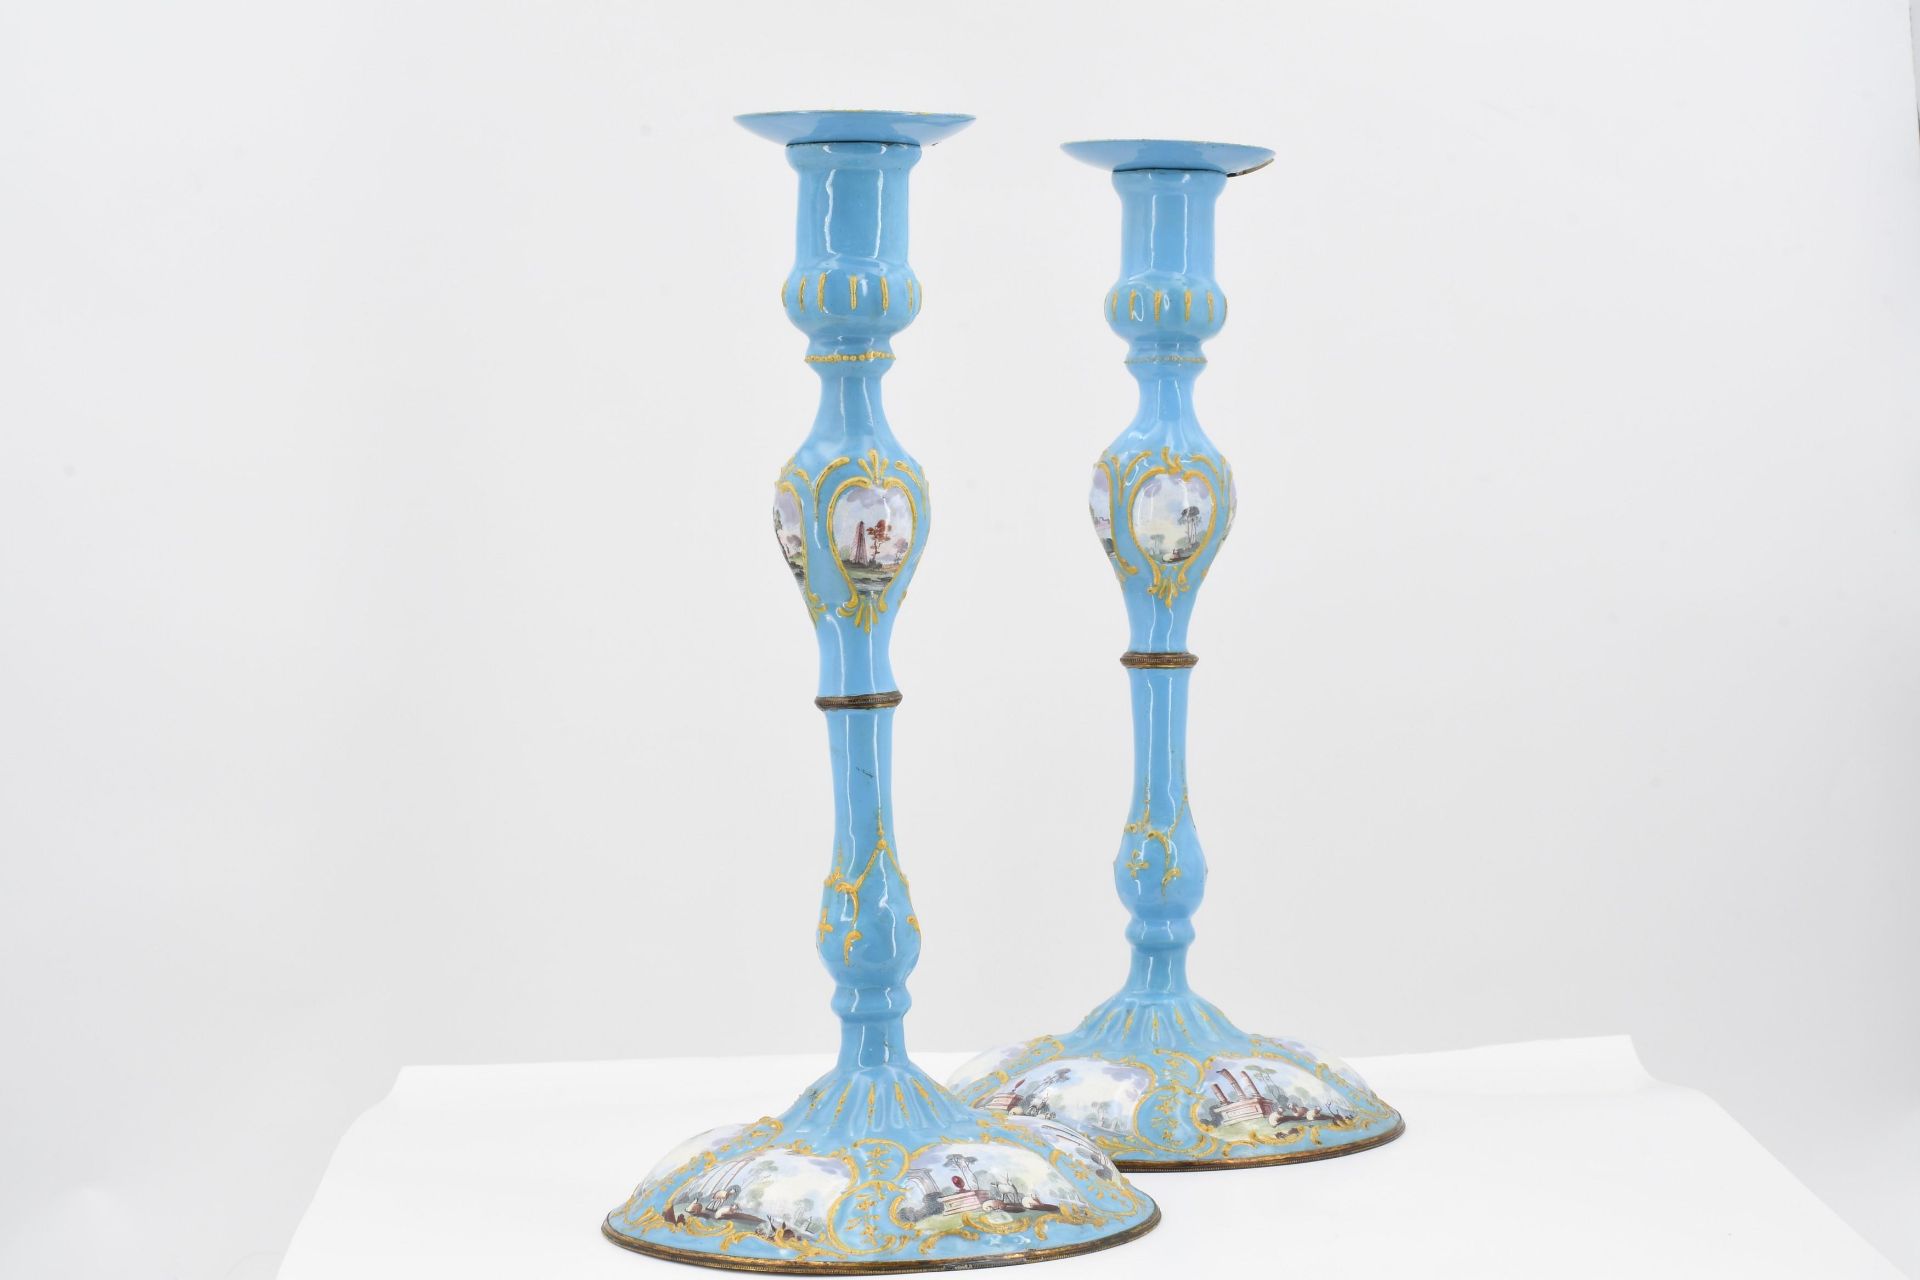 Pair of candlesticks - Image 4 of 6